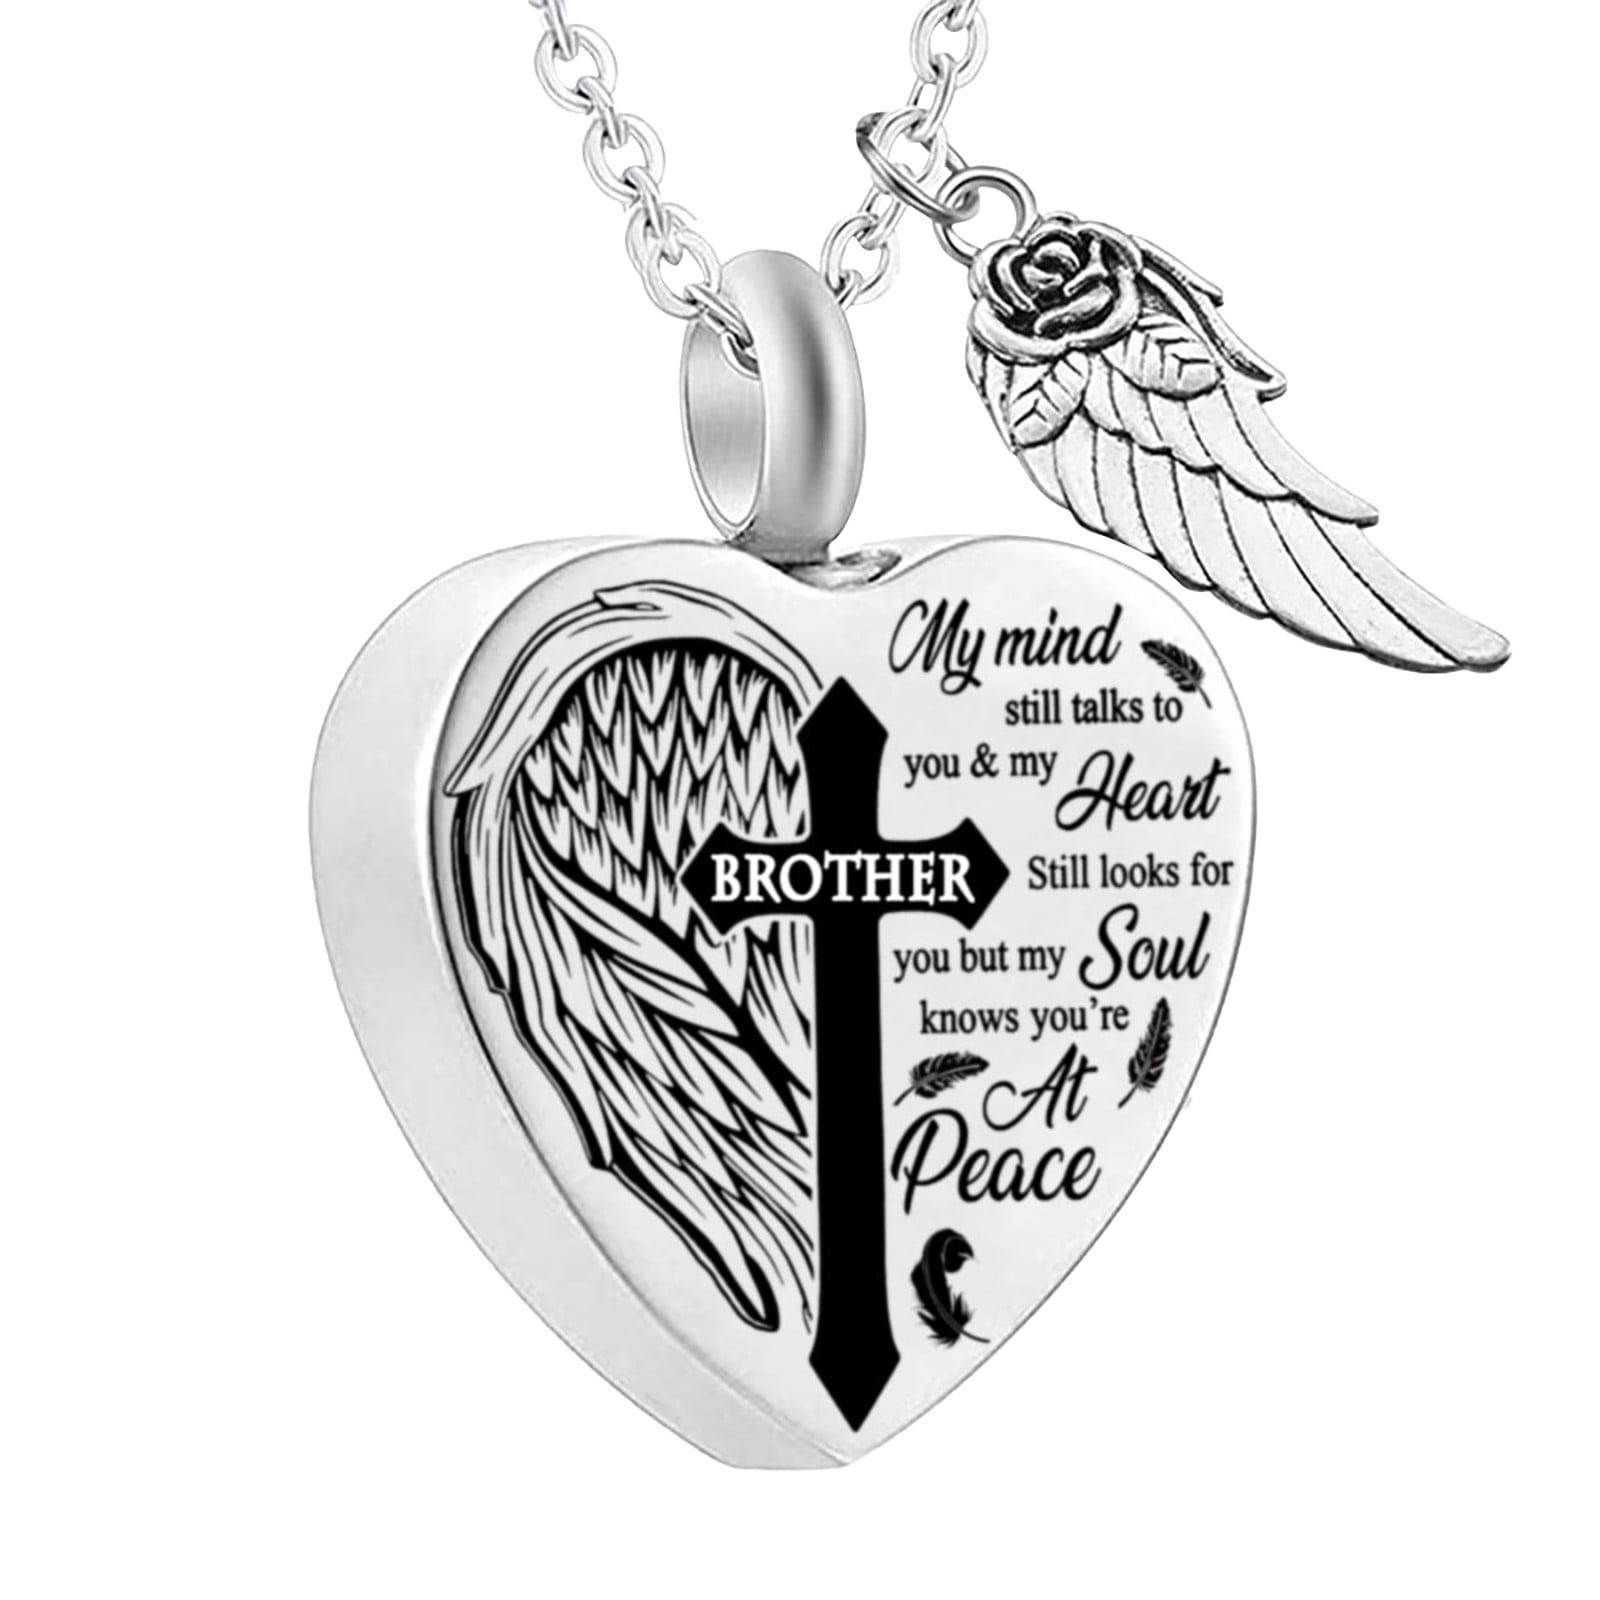 Baocc Necklace Cremation Jewelry Ashes No Longer By My Side Forever Heart Urn Pendant Grandma Grandpa Mom Dad Papa Nana Sister Human A be1206be 0b68 4f1f bc4f 0b48598ed401.a76b2e85d54fe781d41ac12083c10c9c